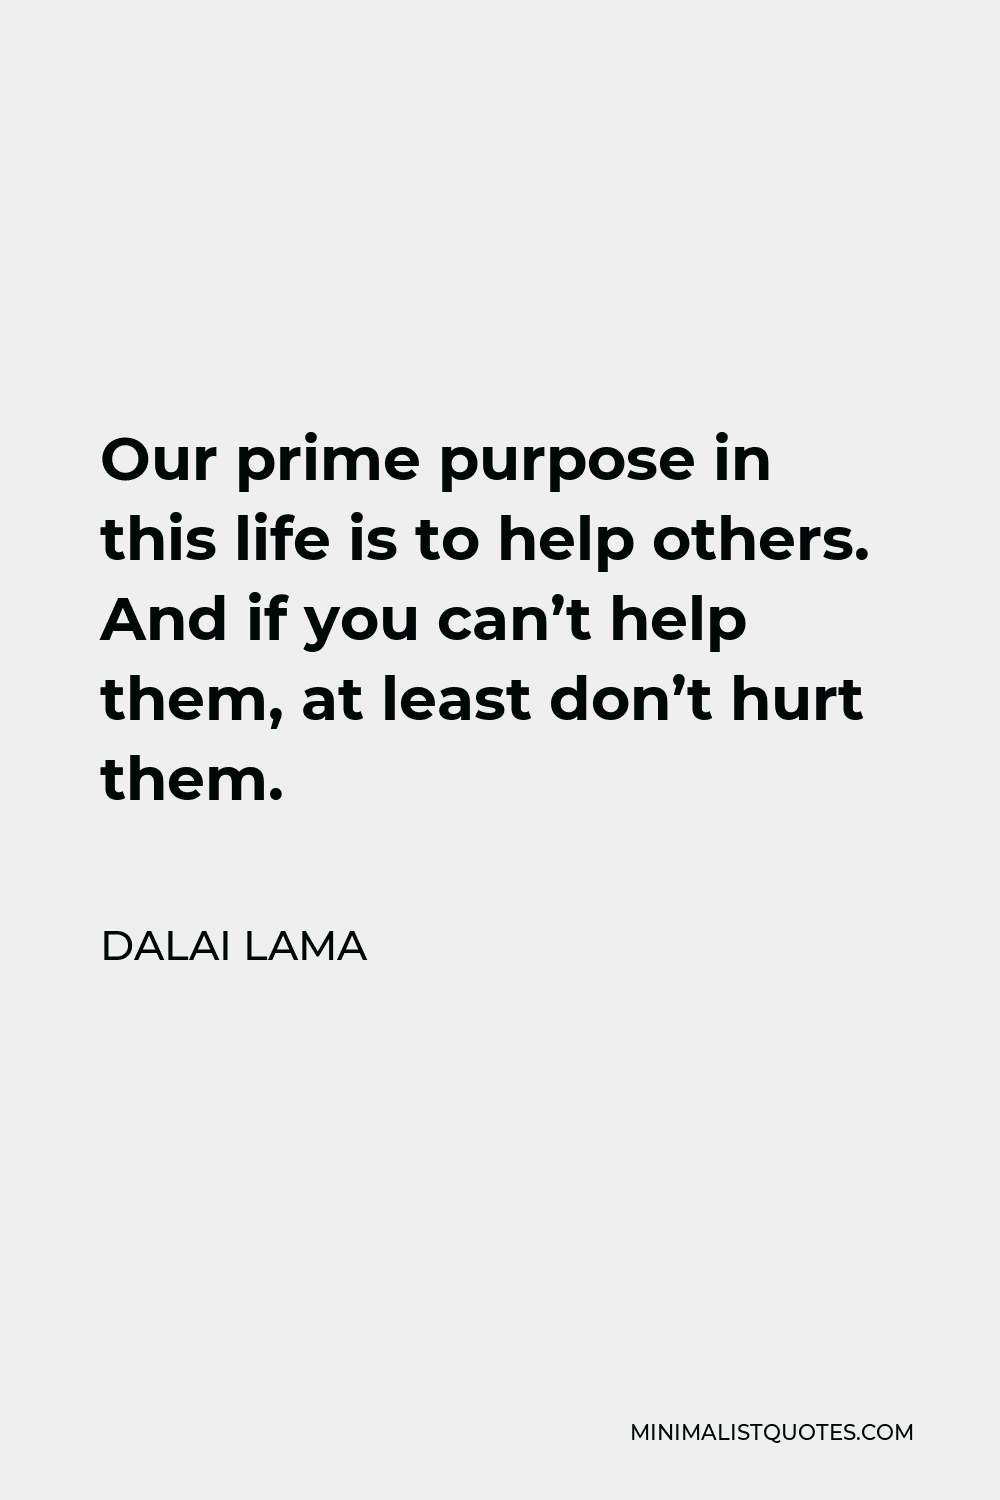 Dalai Lama Quote - Our prime purpose in this life is to help others. And if you can’t help them, at least don’t hurt them.